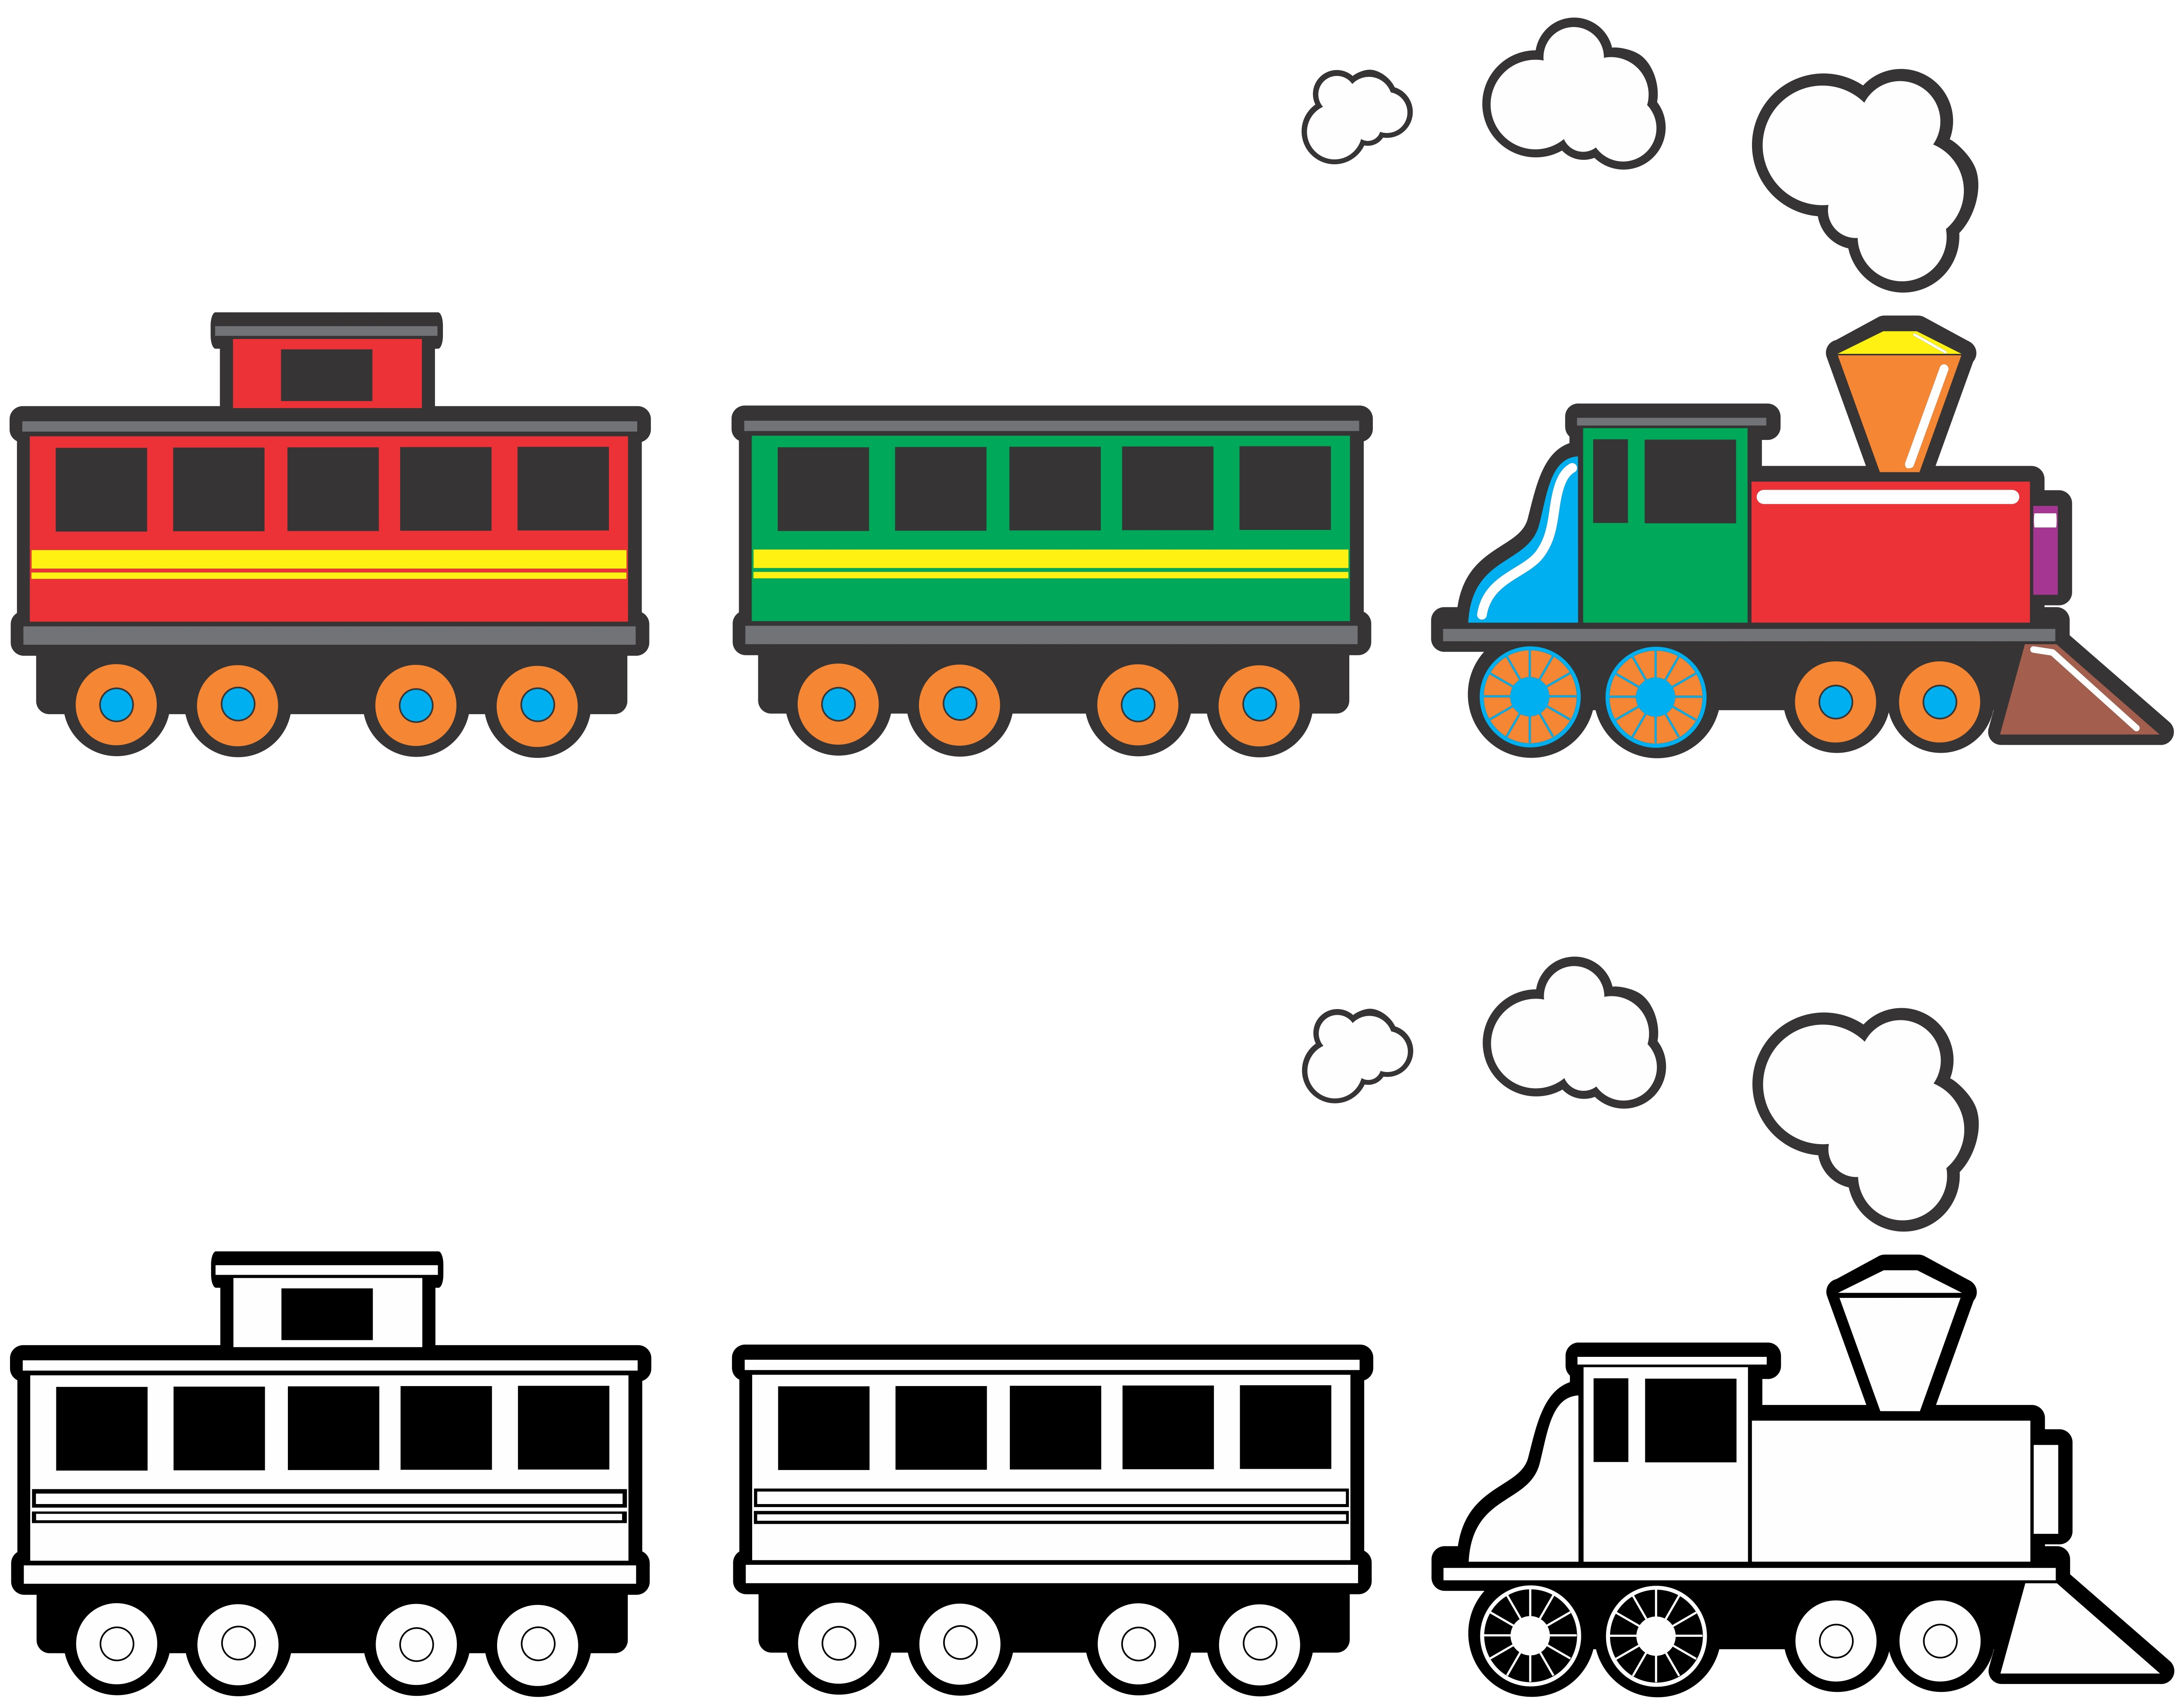 Train car clipart images free.